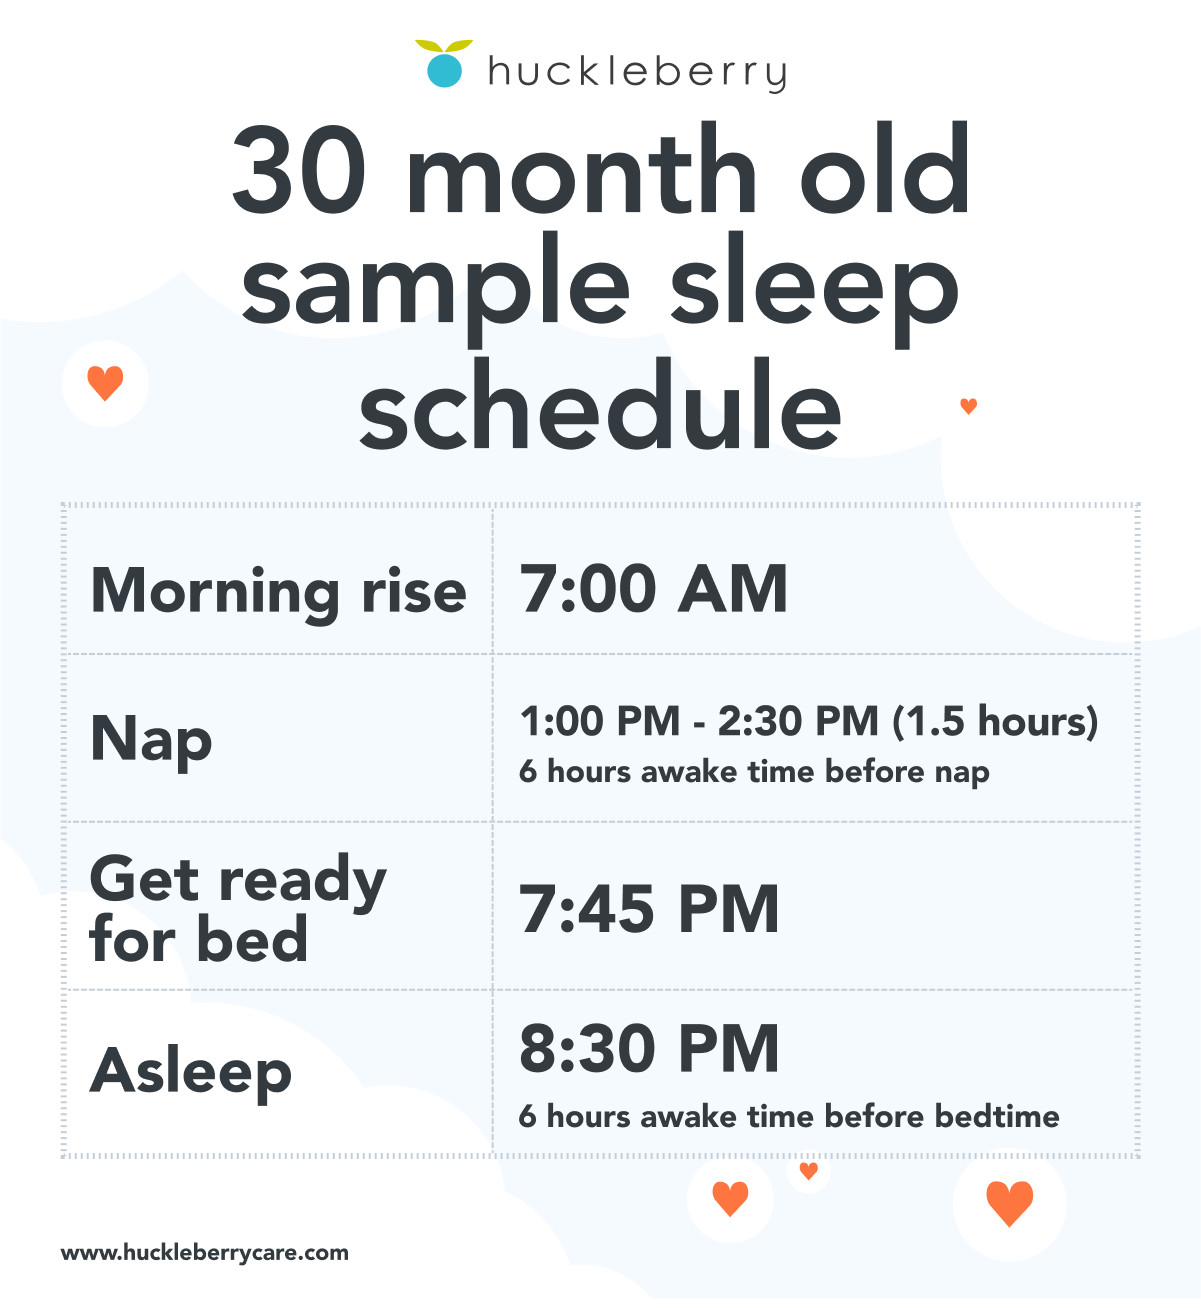 A graphic of the 30 month old sample sleep schedule.